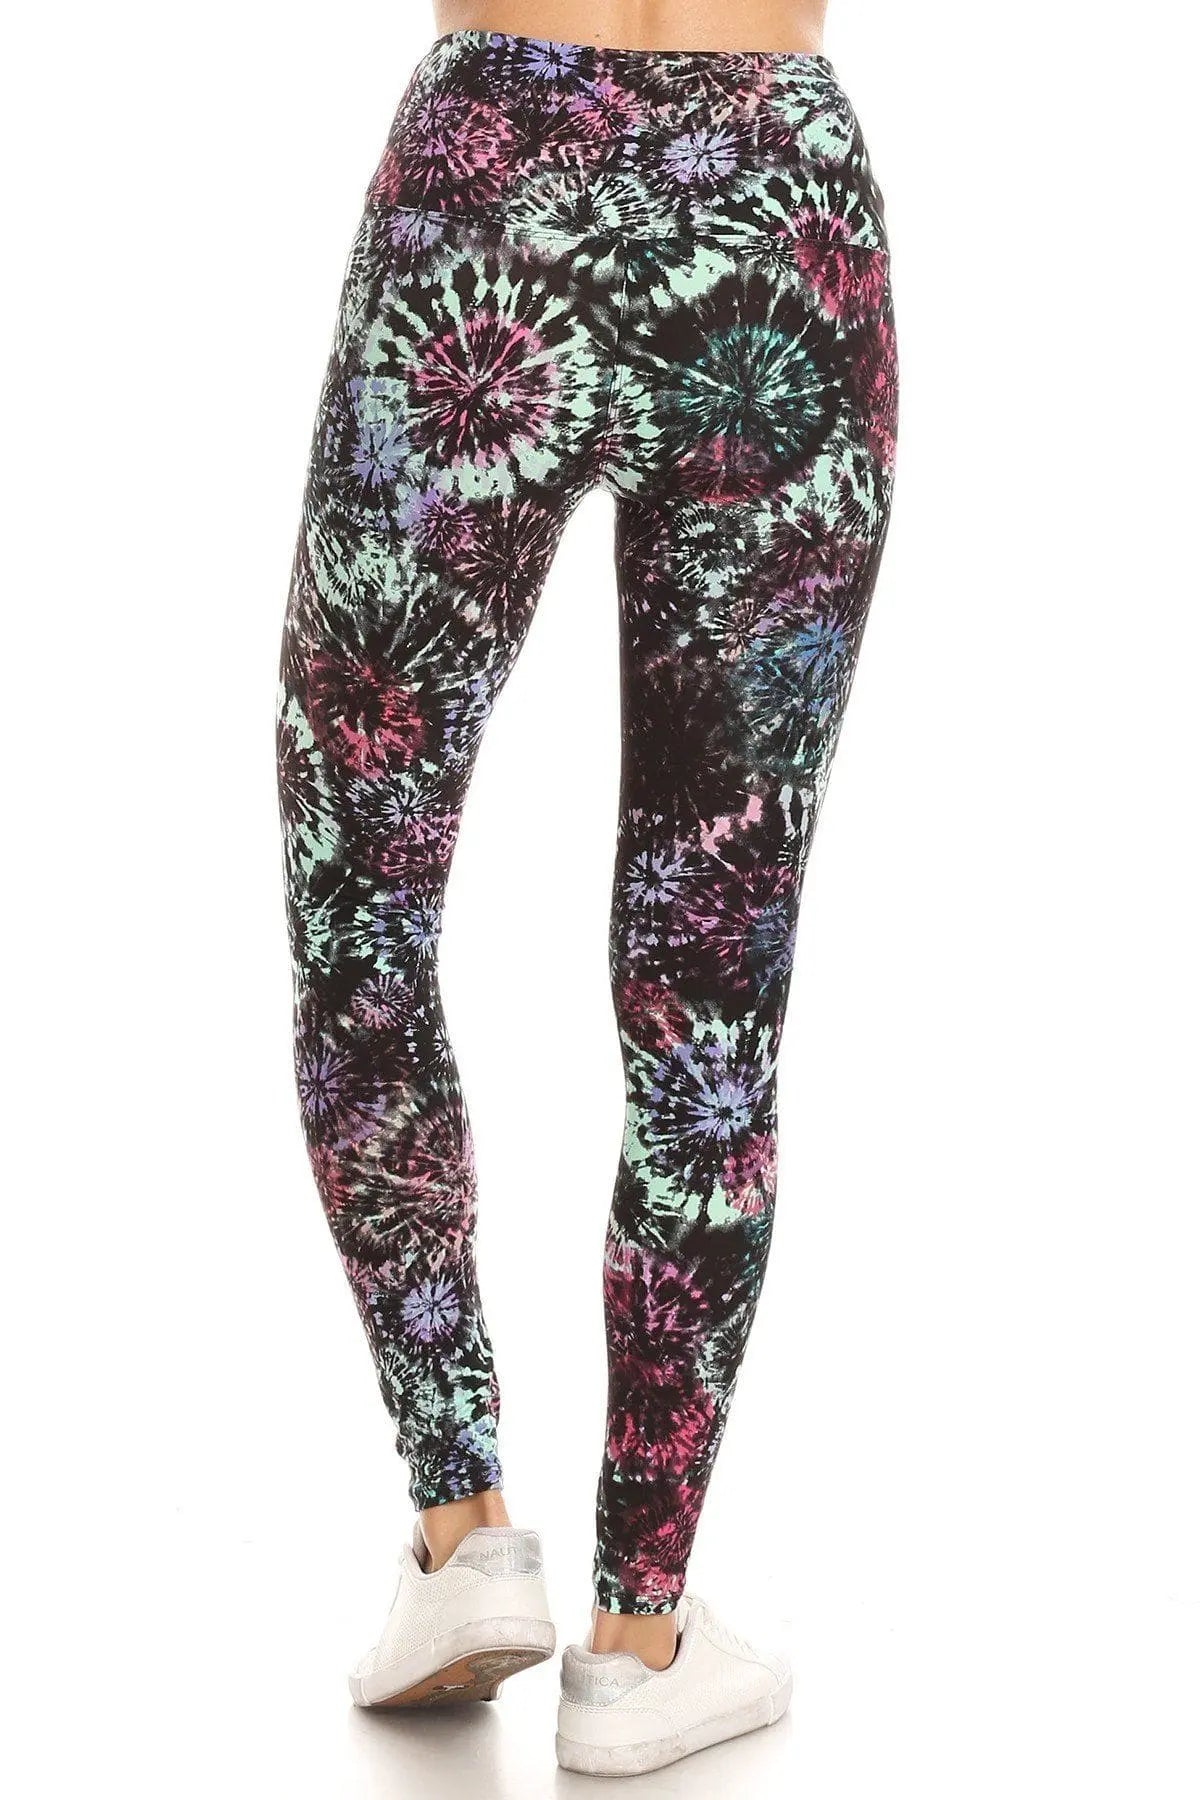 5-inch Long Yoga Style Banded Lined Tie-Dye Printed Knit Legging With High Waist. Blue Zone Planet